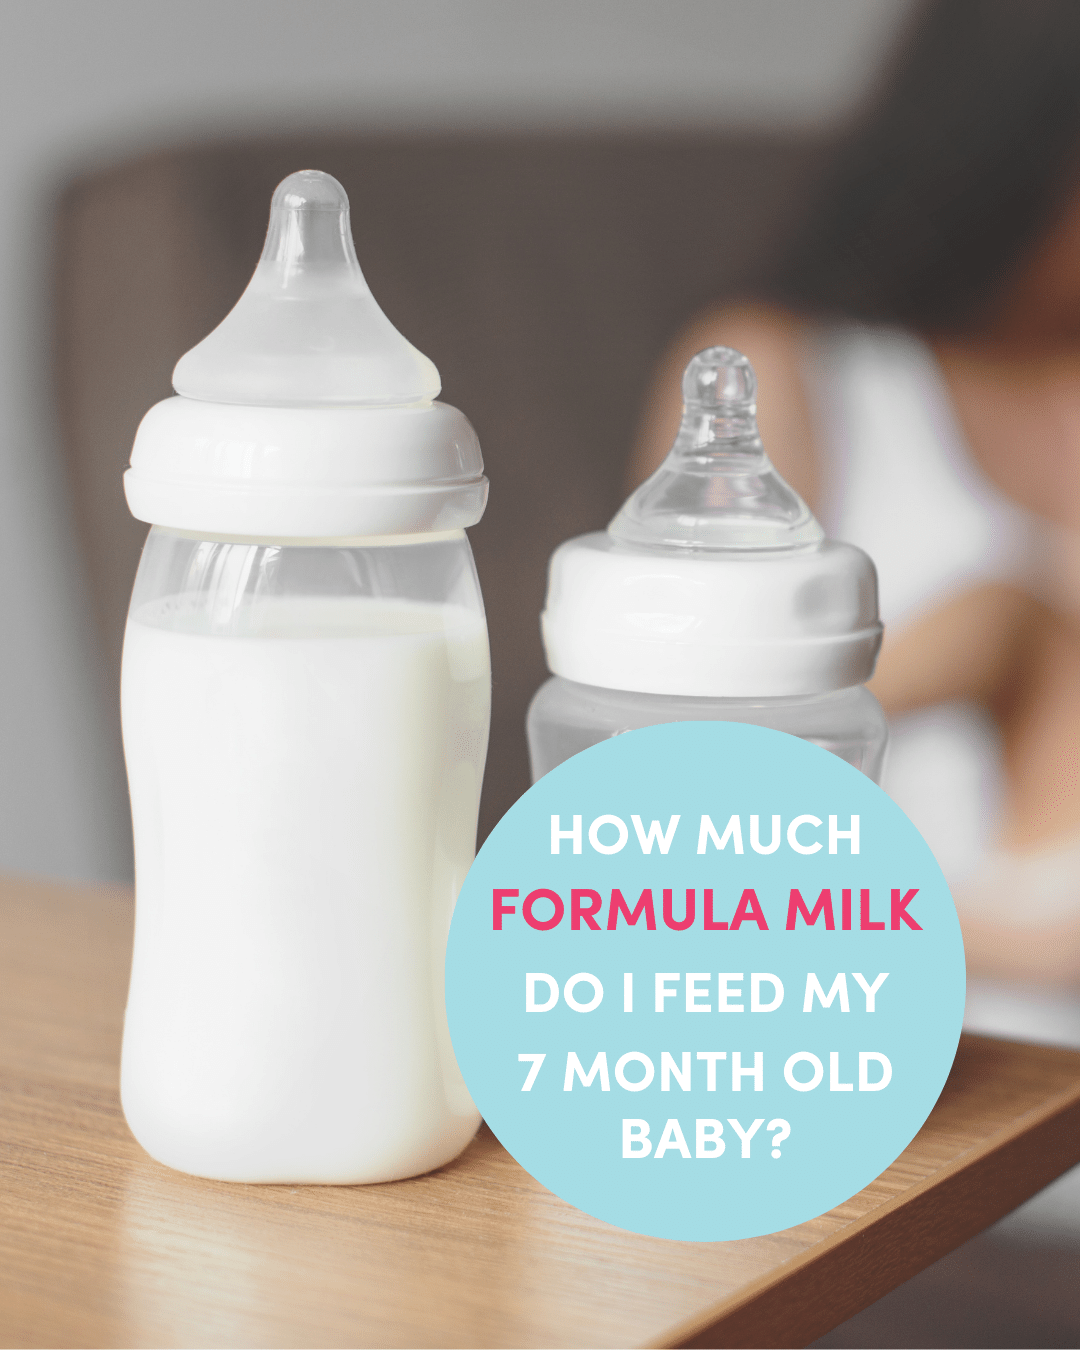 How much formula milk do I feed my 7 month old baby?